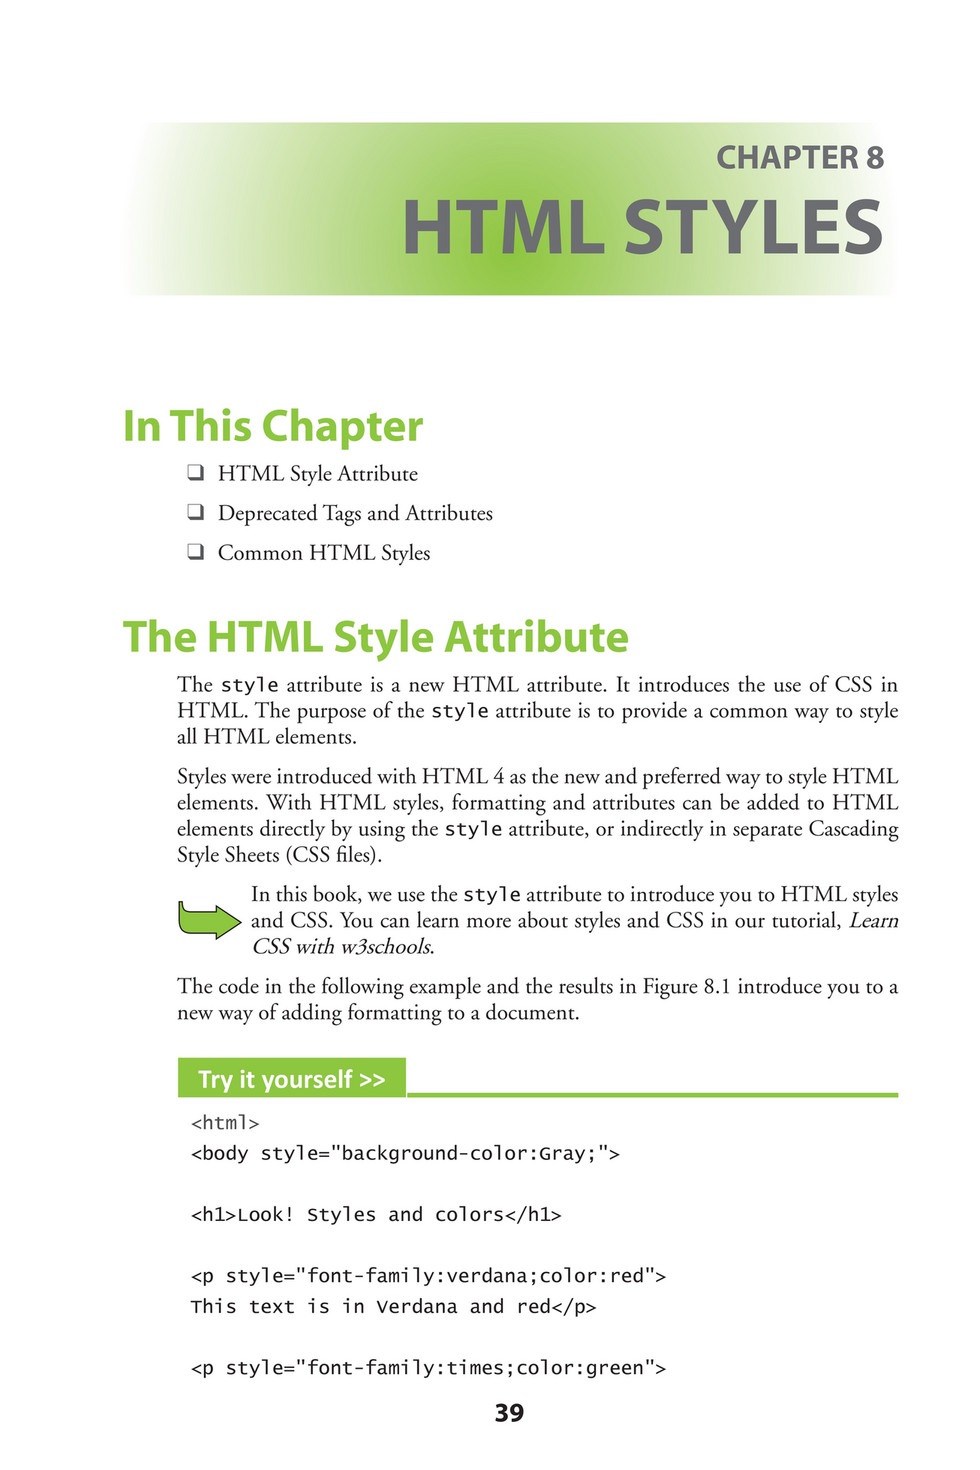 Citrus Fashions - [Wiley] - Learn HTML and CSS - [w3Schools] - Page 50-51 -  Created with 